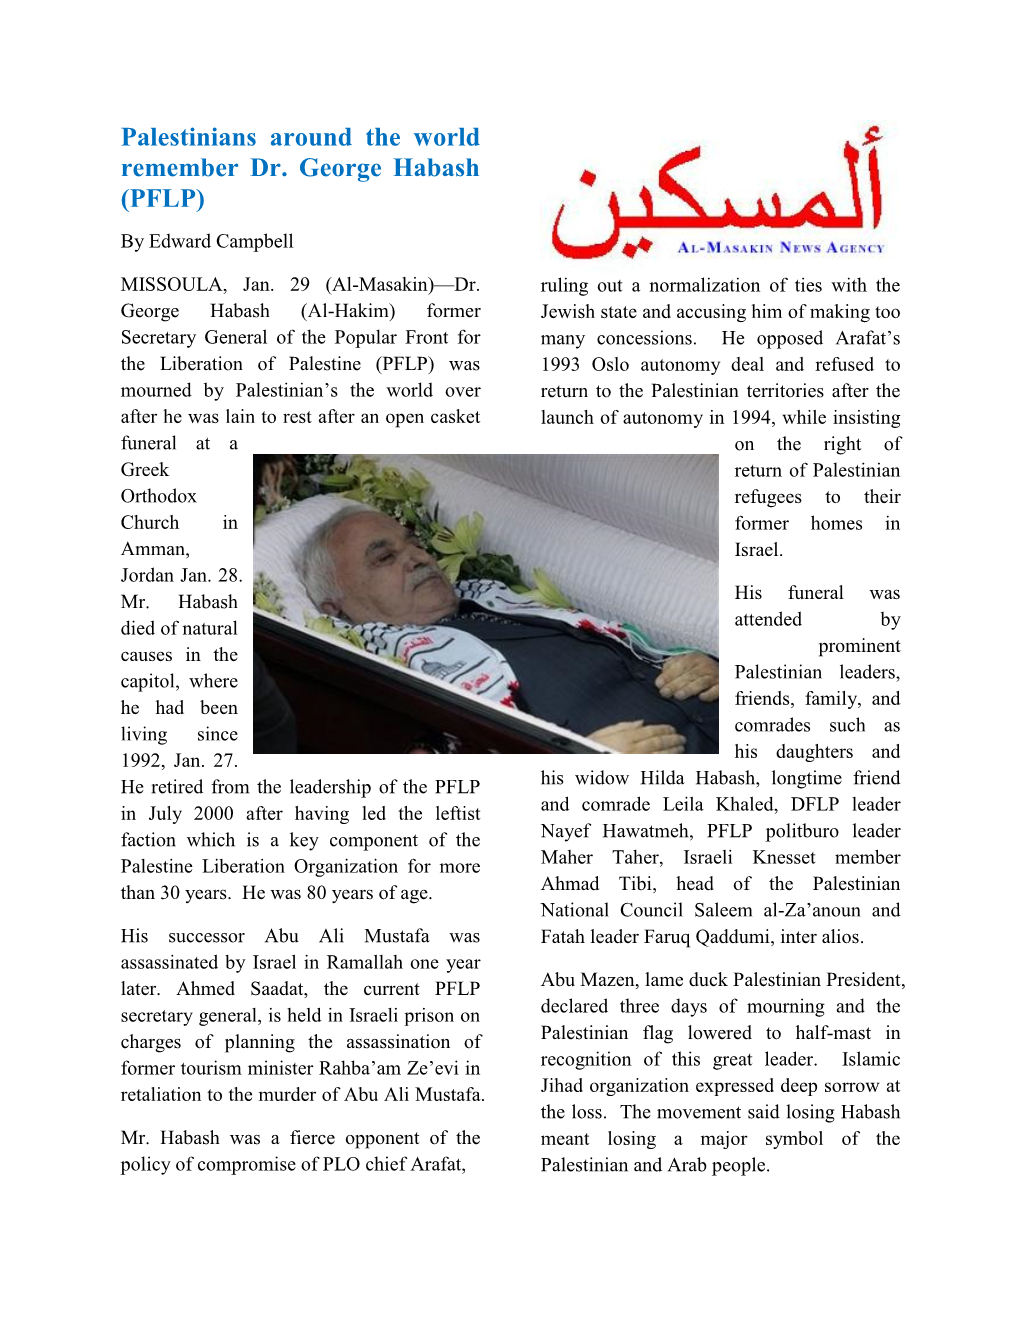 Palestinians Around the World Remember Dr. George Habash (PFLP) by Edward Campbell